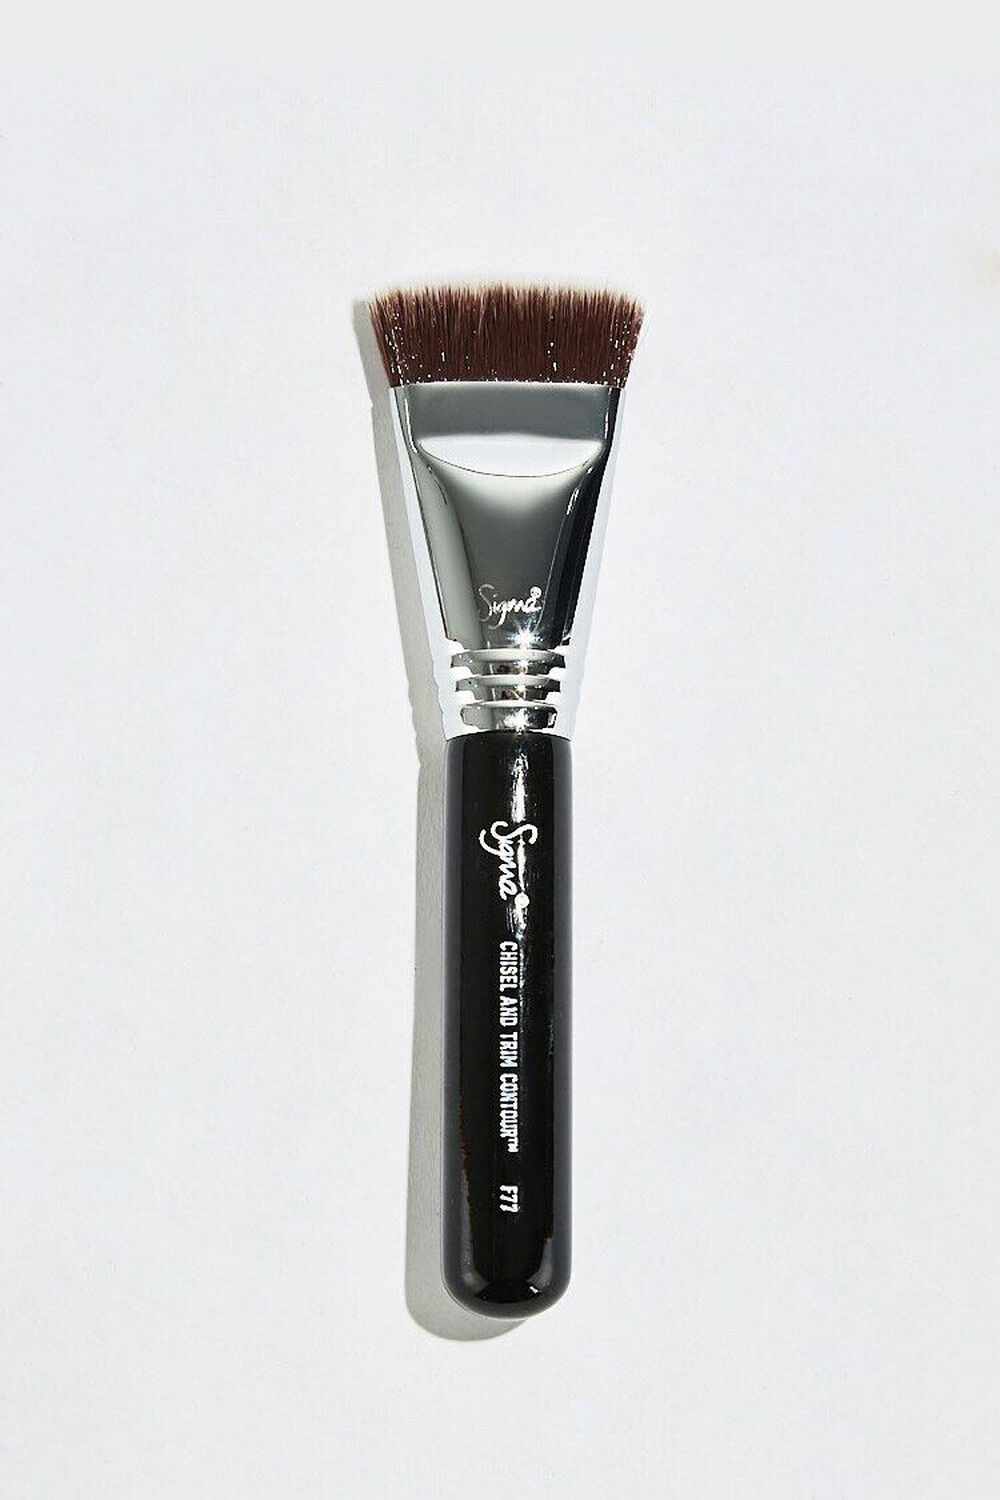 BROWN/MULTI Sigma Beauty F77 Chisel and Trim Contour™ Brush, image 1